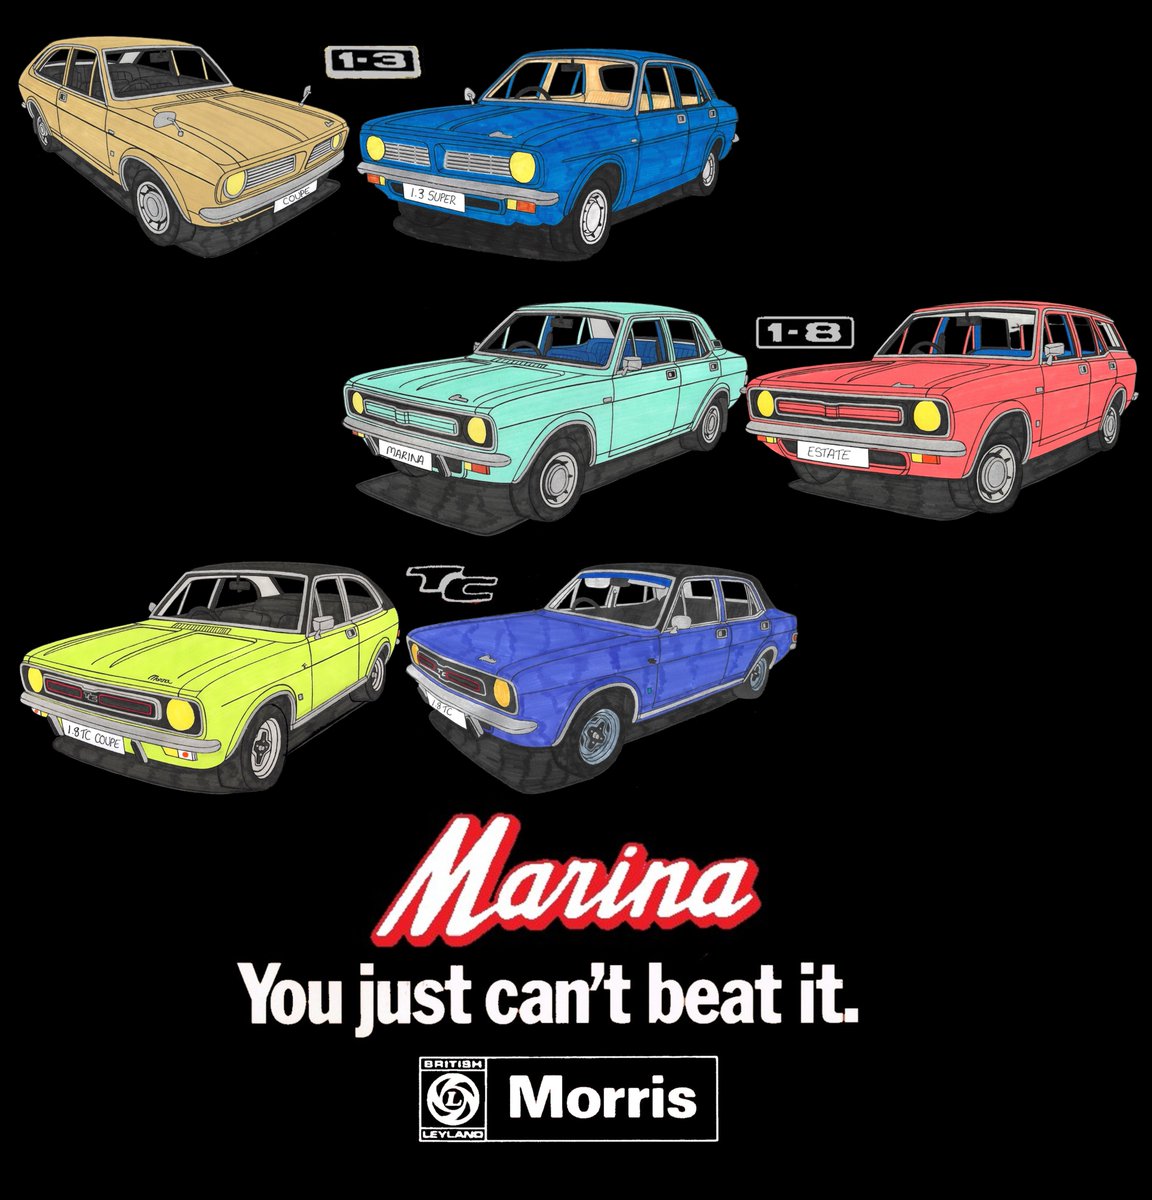 Hi all, I decided to create this to cheer myself up a bit. What you think?😊#britishleyland #morrismarina #morrismarinacoupe #morrismarinasaloon #morrismarinaestate #morrismarina1300 #morrismarina1800 #morrismarinatc